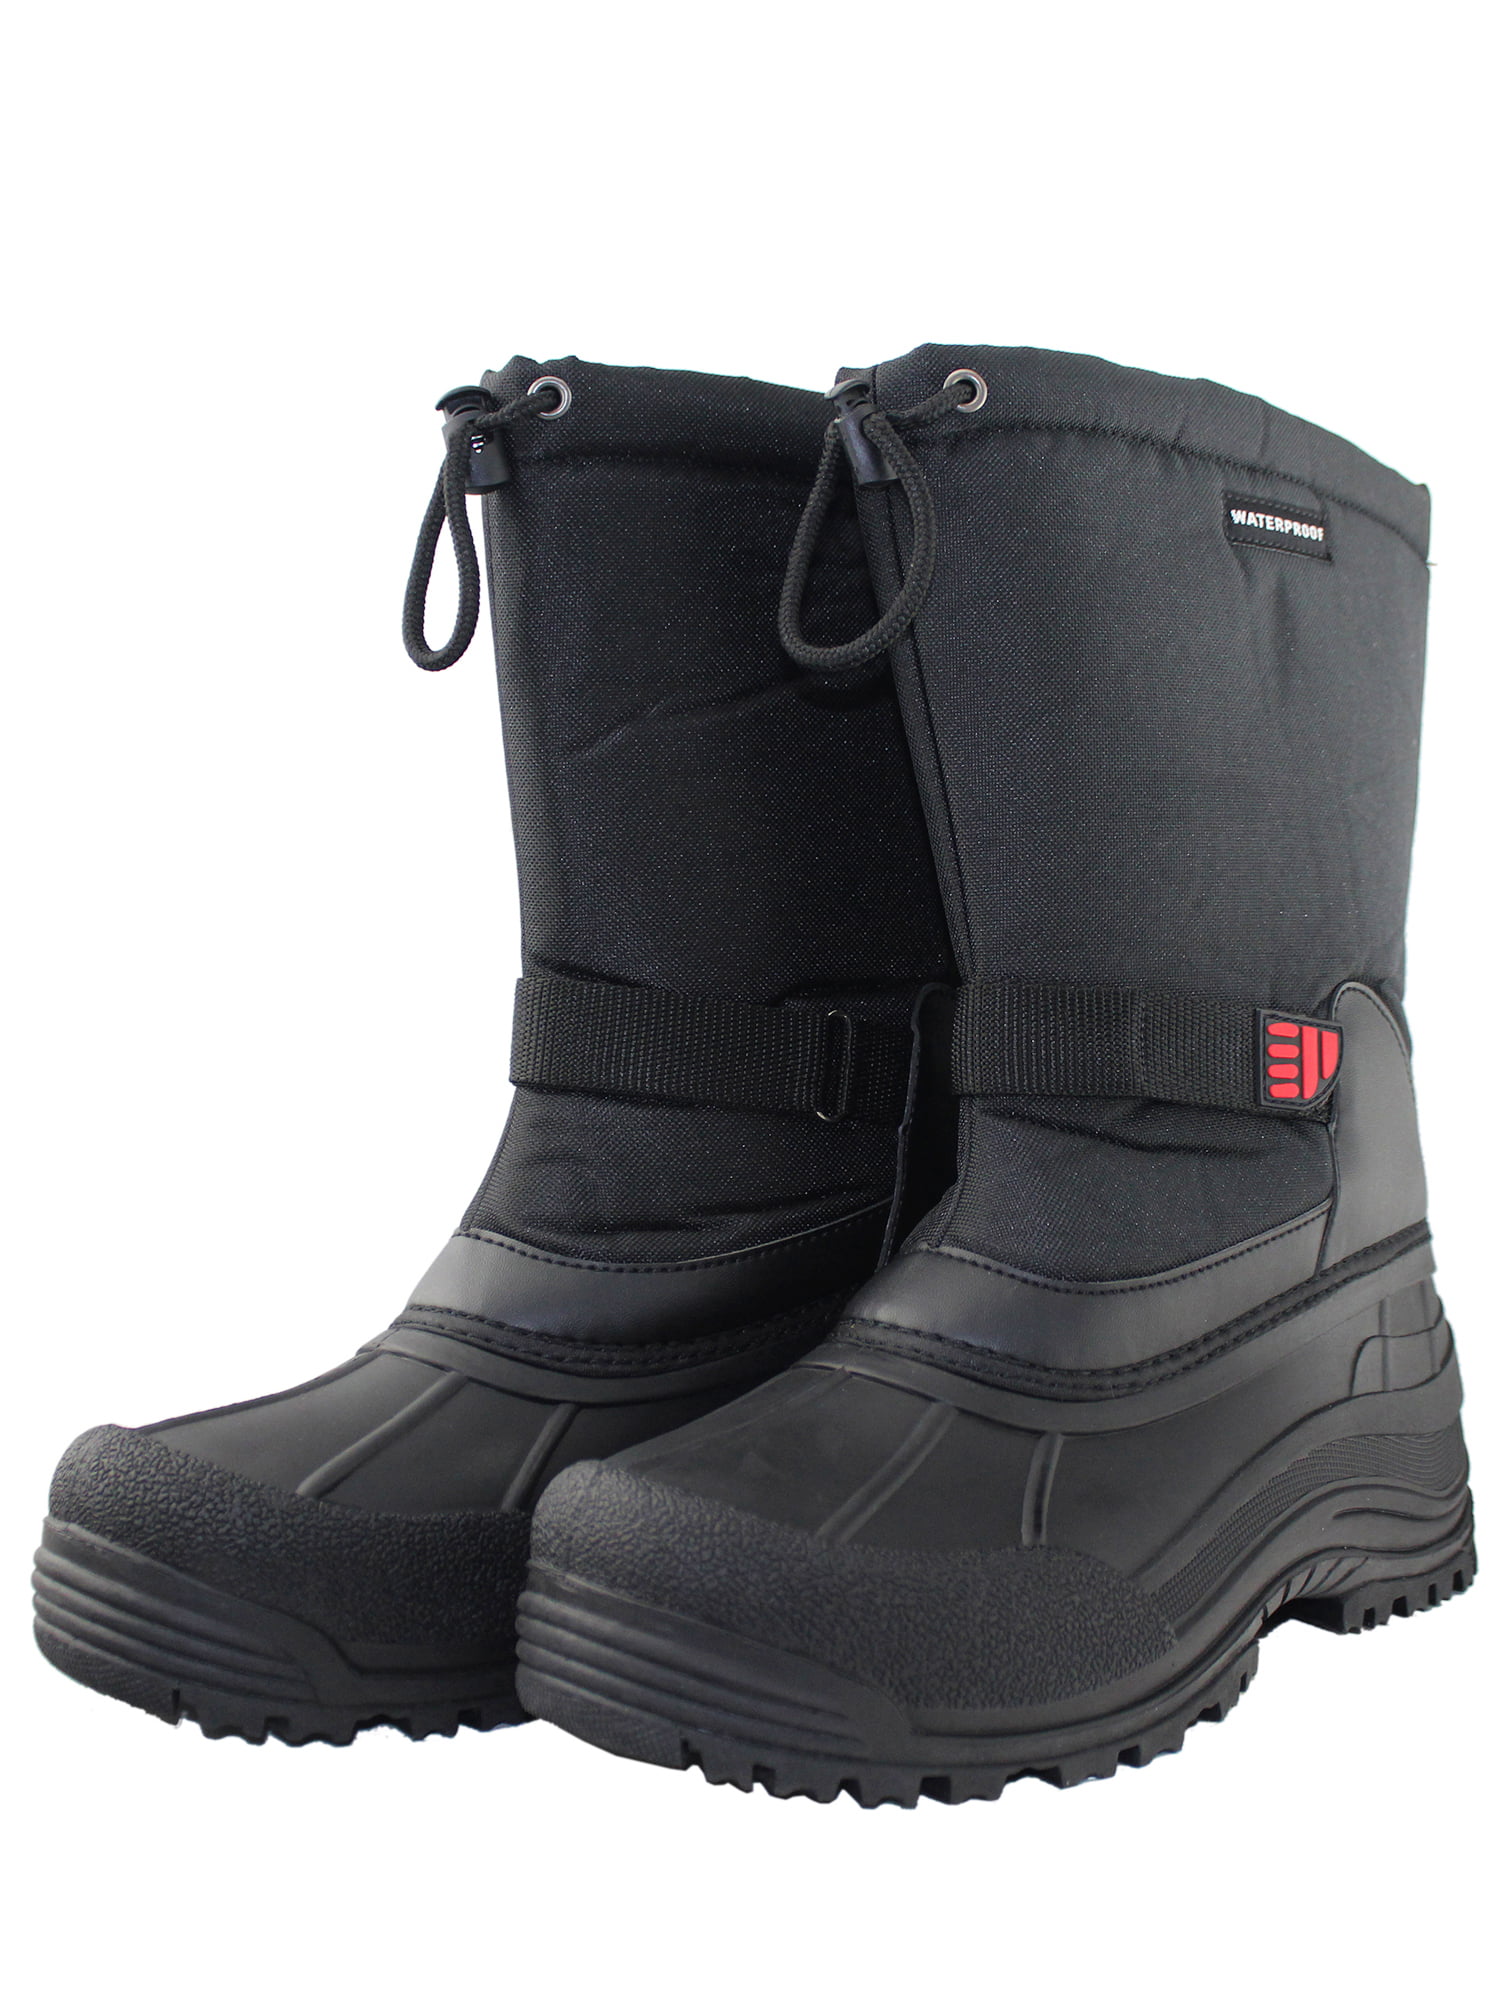 pull on snow boots mens